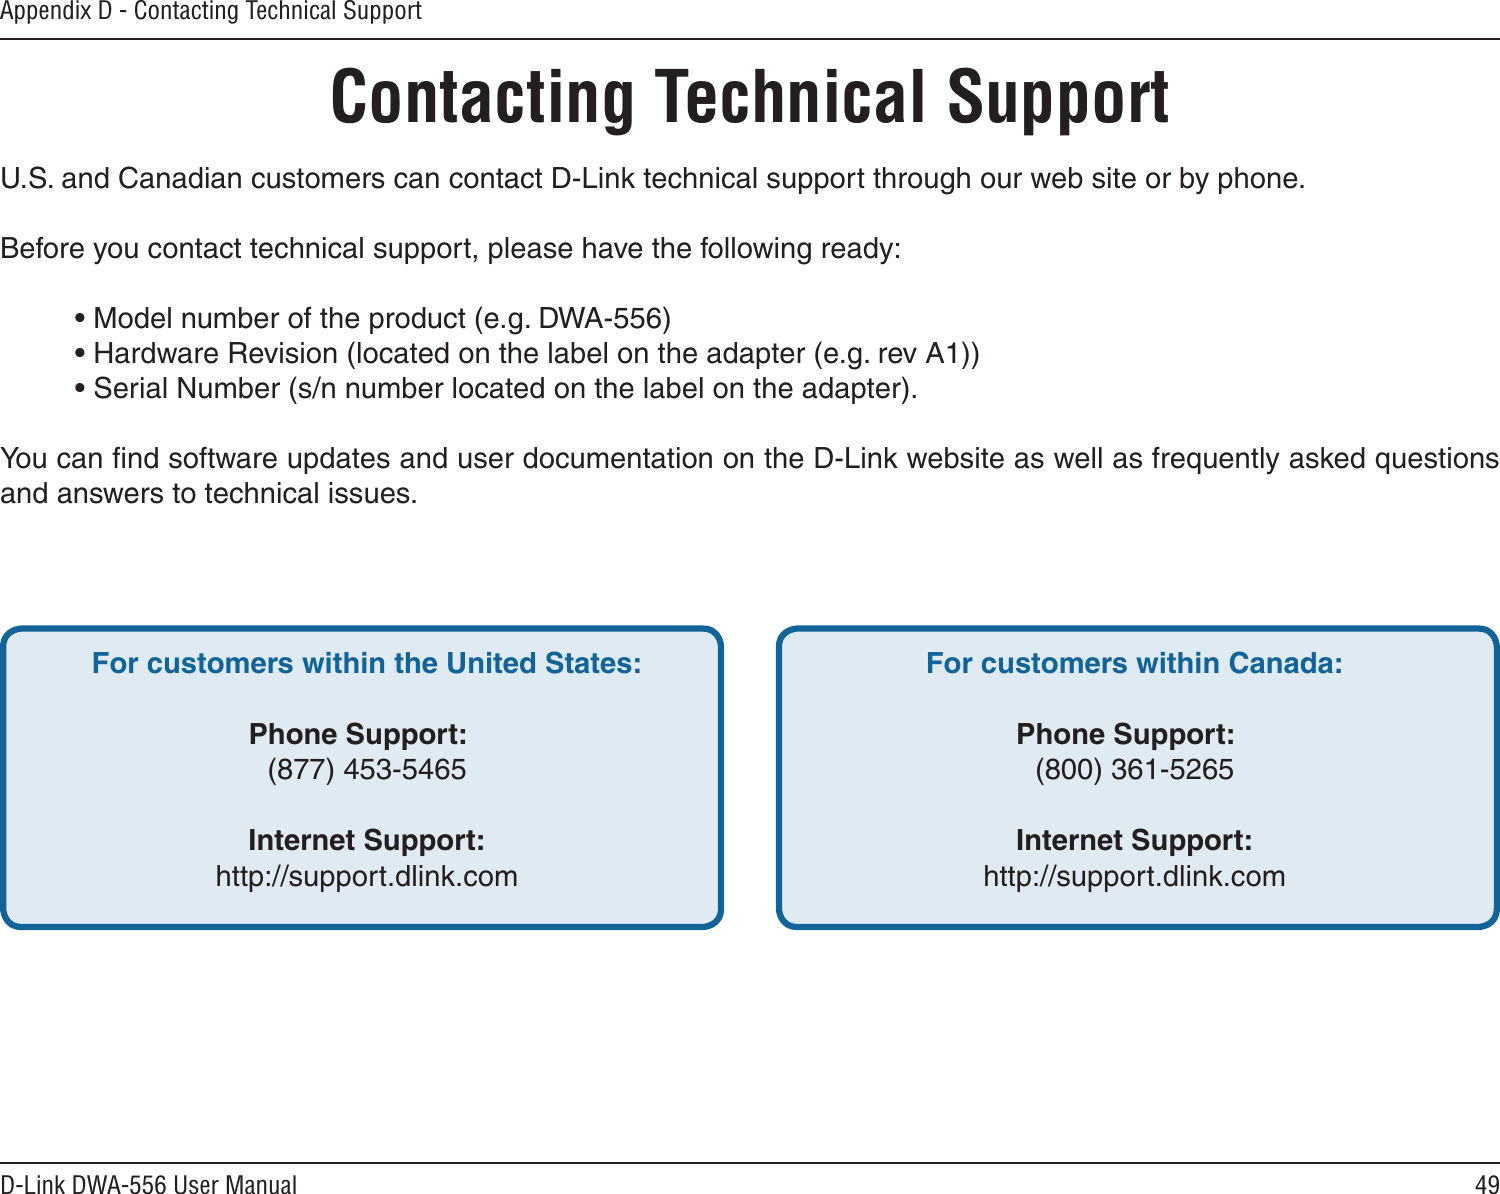 49D-Link DWA-556 User ManualAppendix D - Contacting Technical SupportContacting Technical SupportU.S. and Canadian customers can contact D-Link technical support through our web site or by phone.Before you contact technical support, please have the following ready:  • Model number of the product (e.g. DWA-556)  • Hardware Revision (located on the label on the adapter (e.g. rev A1))  • Serial Number (s/n number located on the label on the adapter). You can ﬁnd software updates and user documentation on the D-Link website as well as frequently asked questions and answers to technical issues.For customers within the United States: Phone Support:  (877) 453-5465  Internet Support:  http://support.dlink.com For customers within Canada: Phone Support:  (800) 361-5265    Internet Support:  http://support.dlink.com